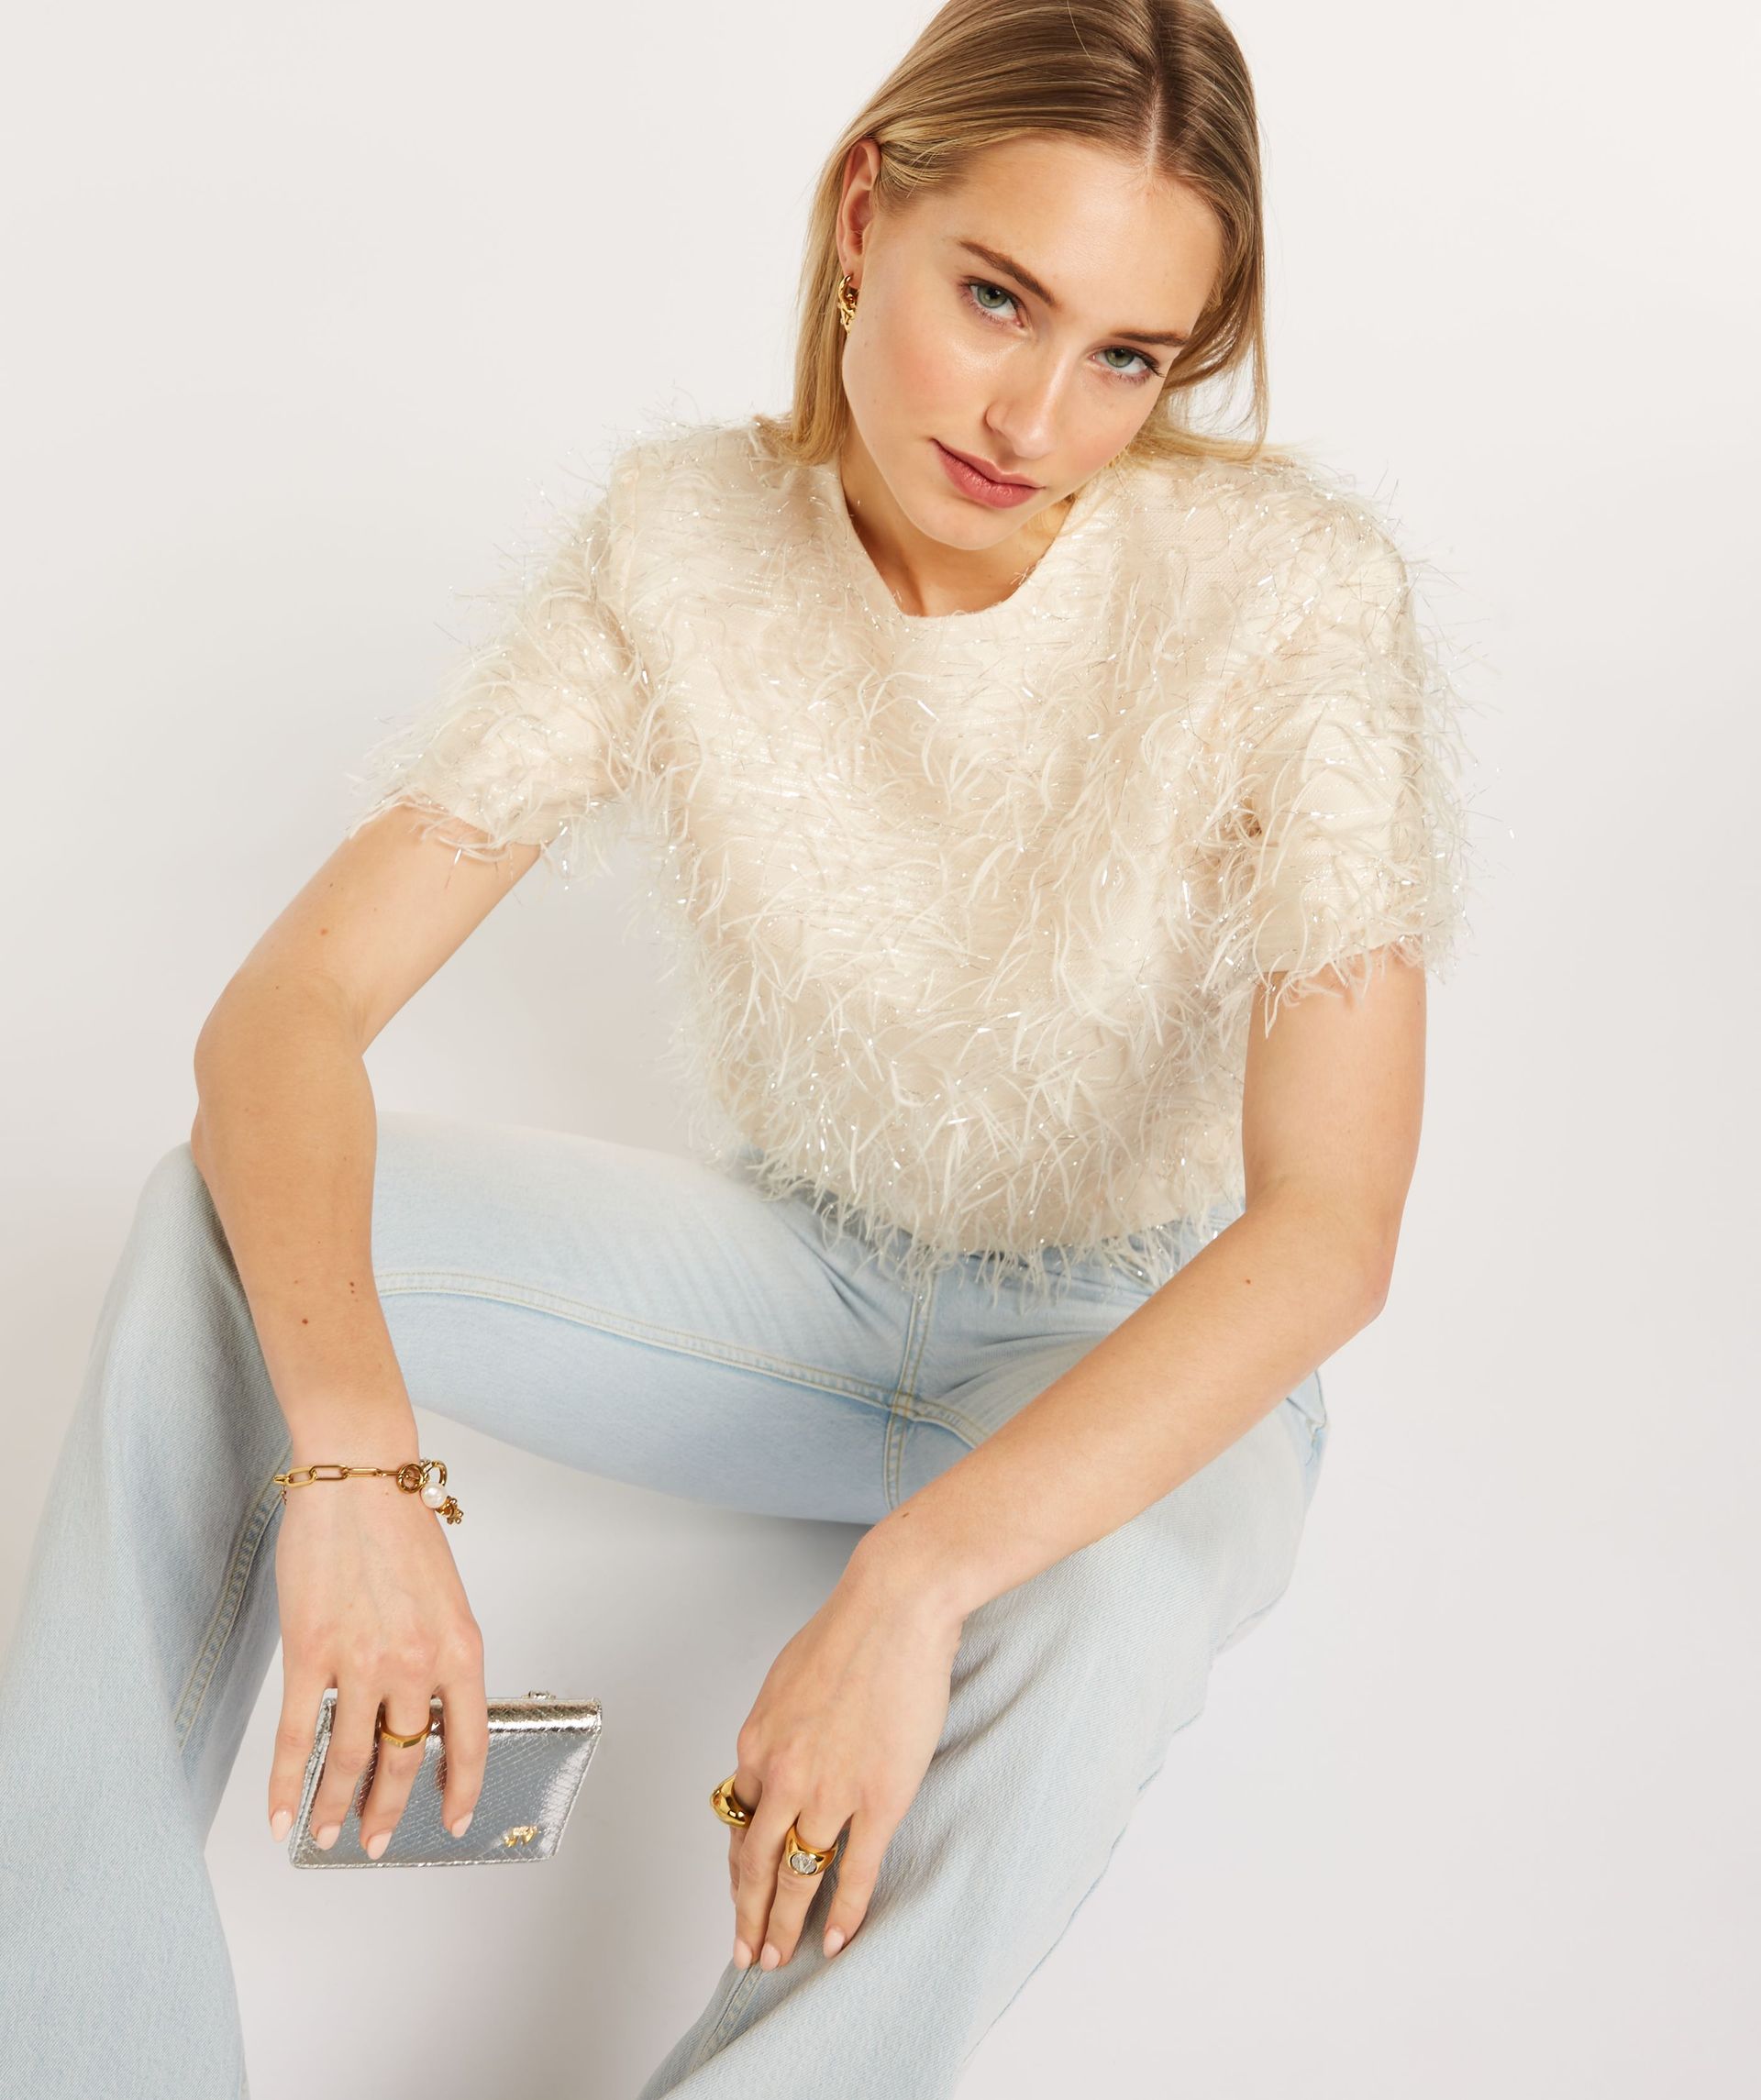 KILIANA cropped top with lurex